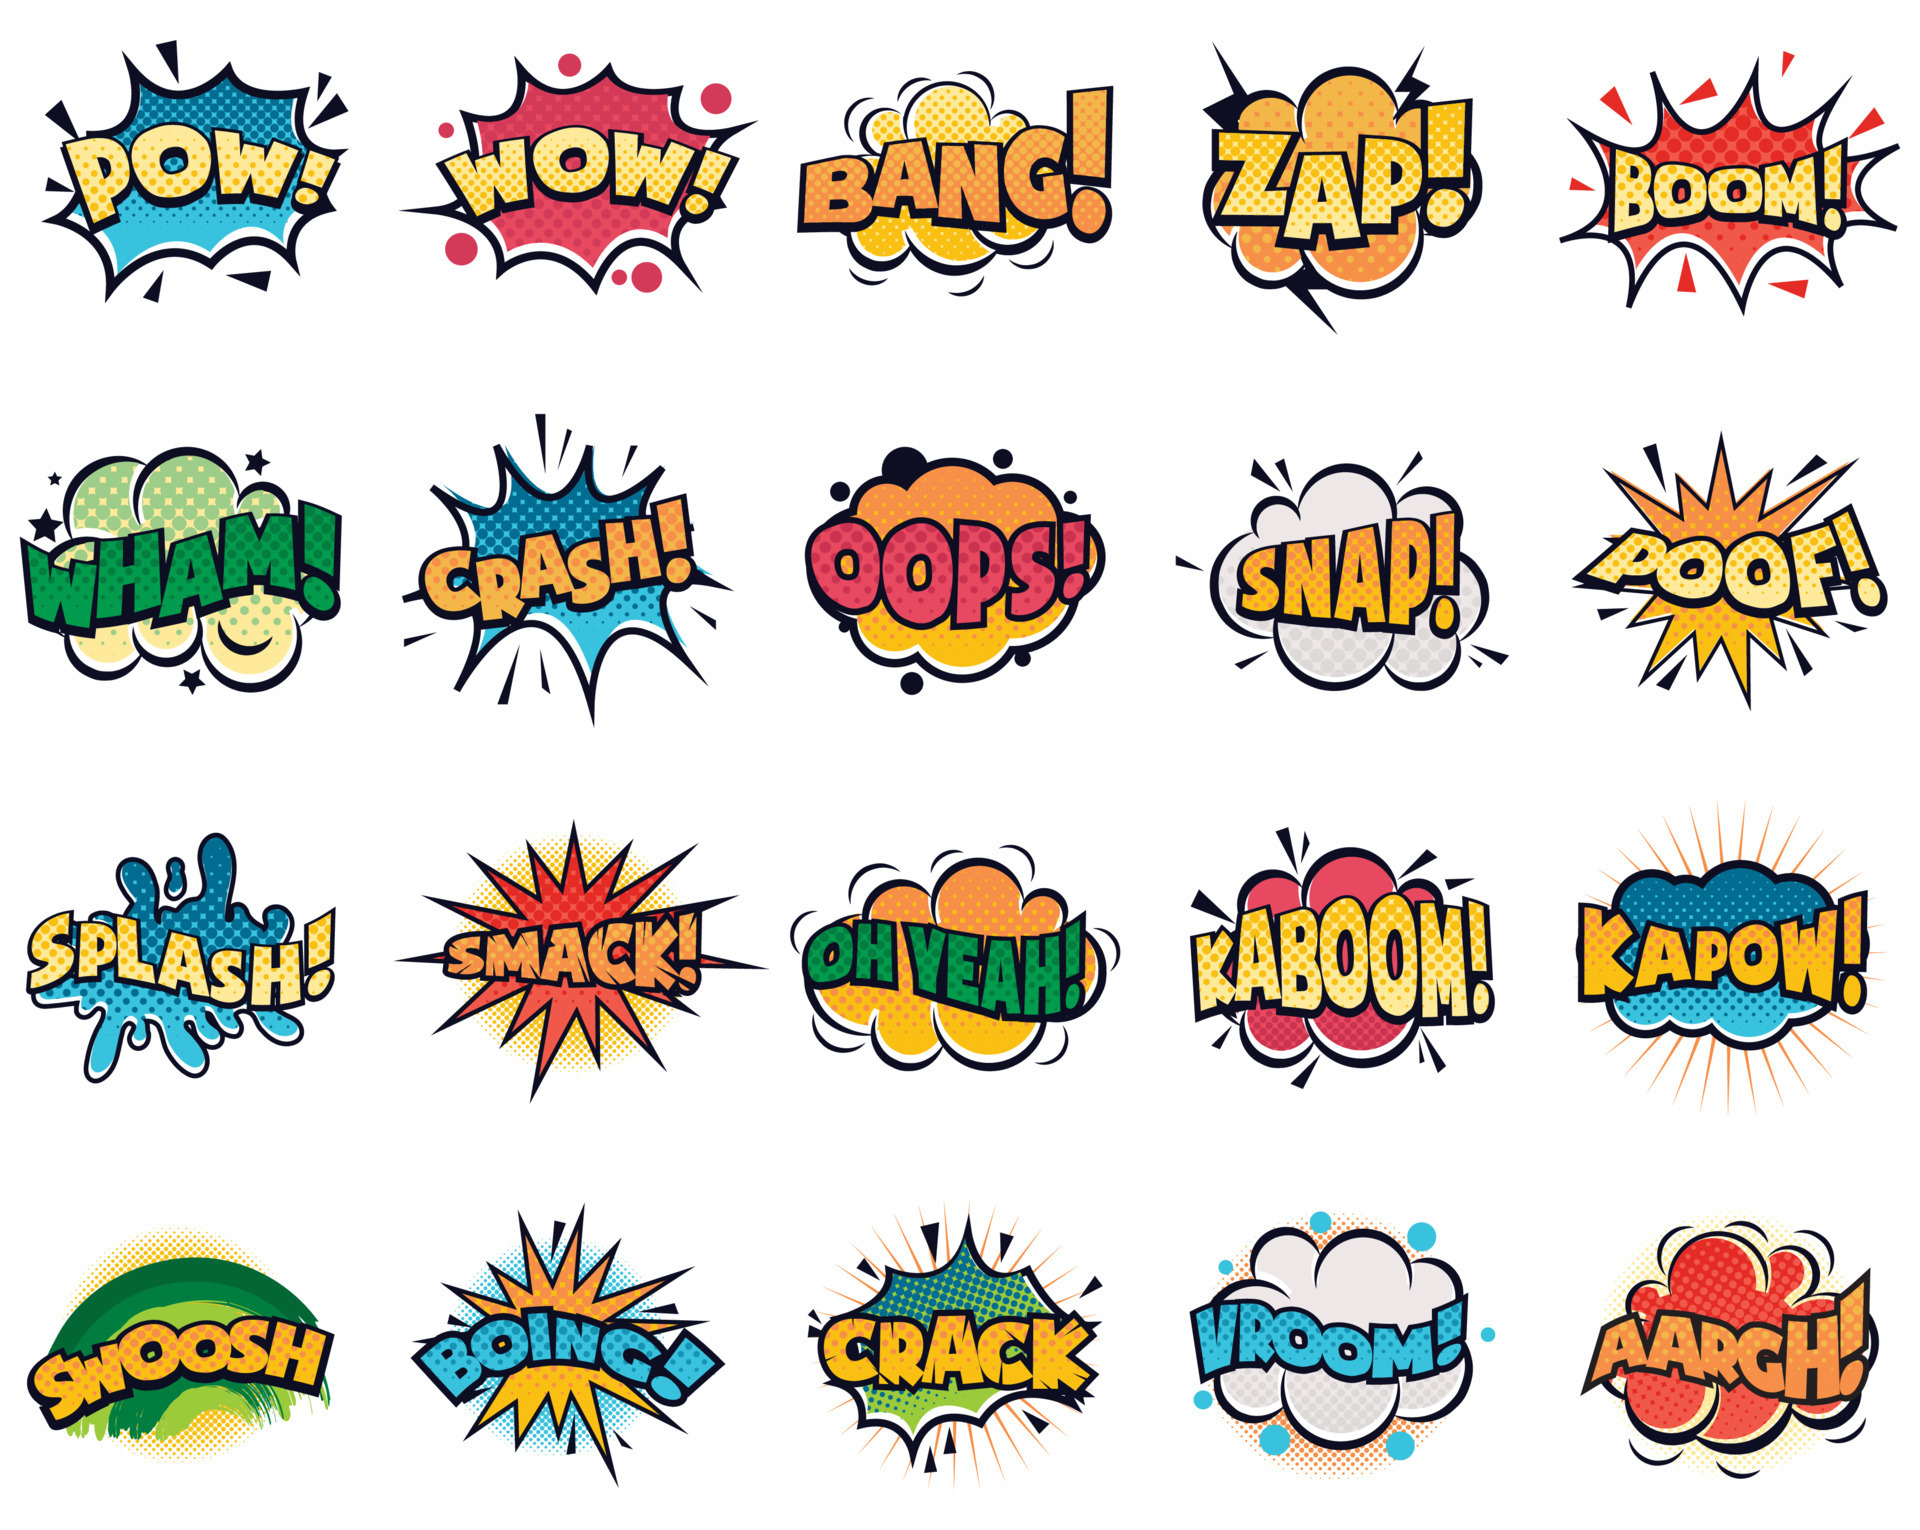 Comic speech bubble. Cartoon comic book text clouds. Comic pop art book  pow, oops, wow, boom exclamation signs vector comics words set. Creative  retro balloons with funny slang phrases and expressions 10658022